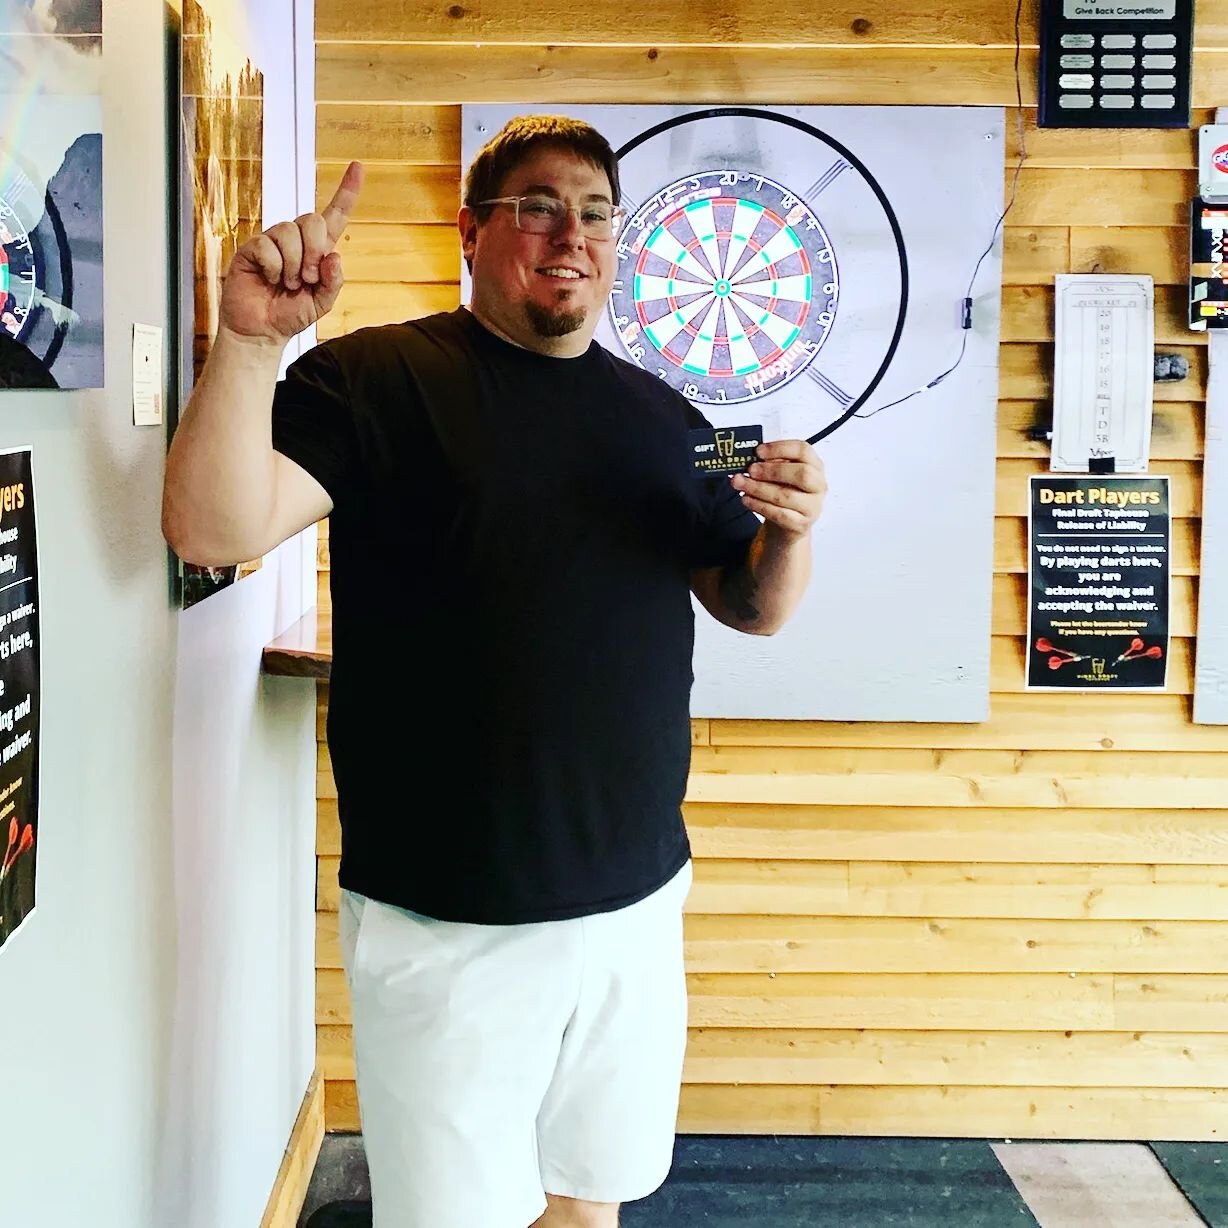 Happy Sunday Beer Friends!!

Come in and enjoy a pint of craft beer with us today! 

Open 3 to 9 pm.

Every Sunday....
We have our Sunday Darts &amp; Drafts Dart Tournament on Sunday nights. Join other craft beer and Dart enthusiasts for a little fun